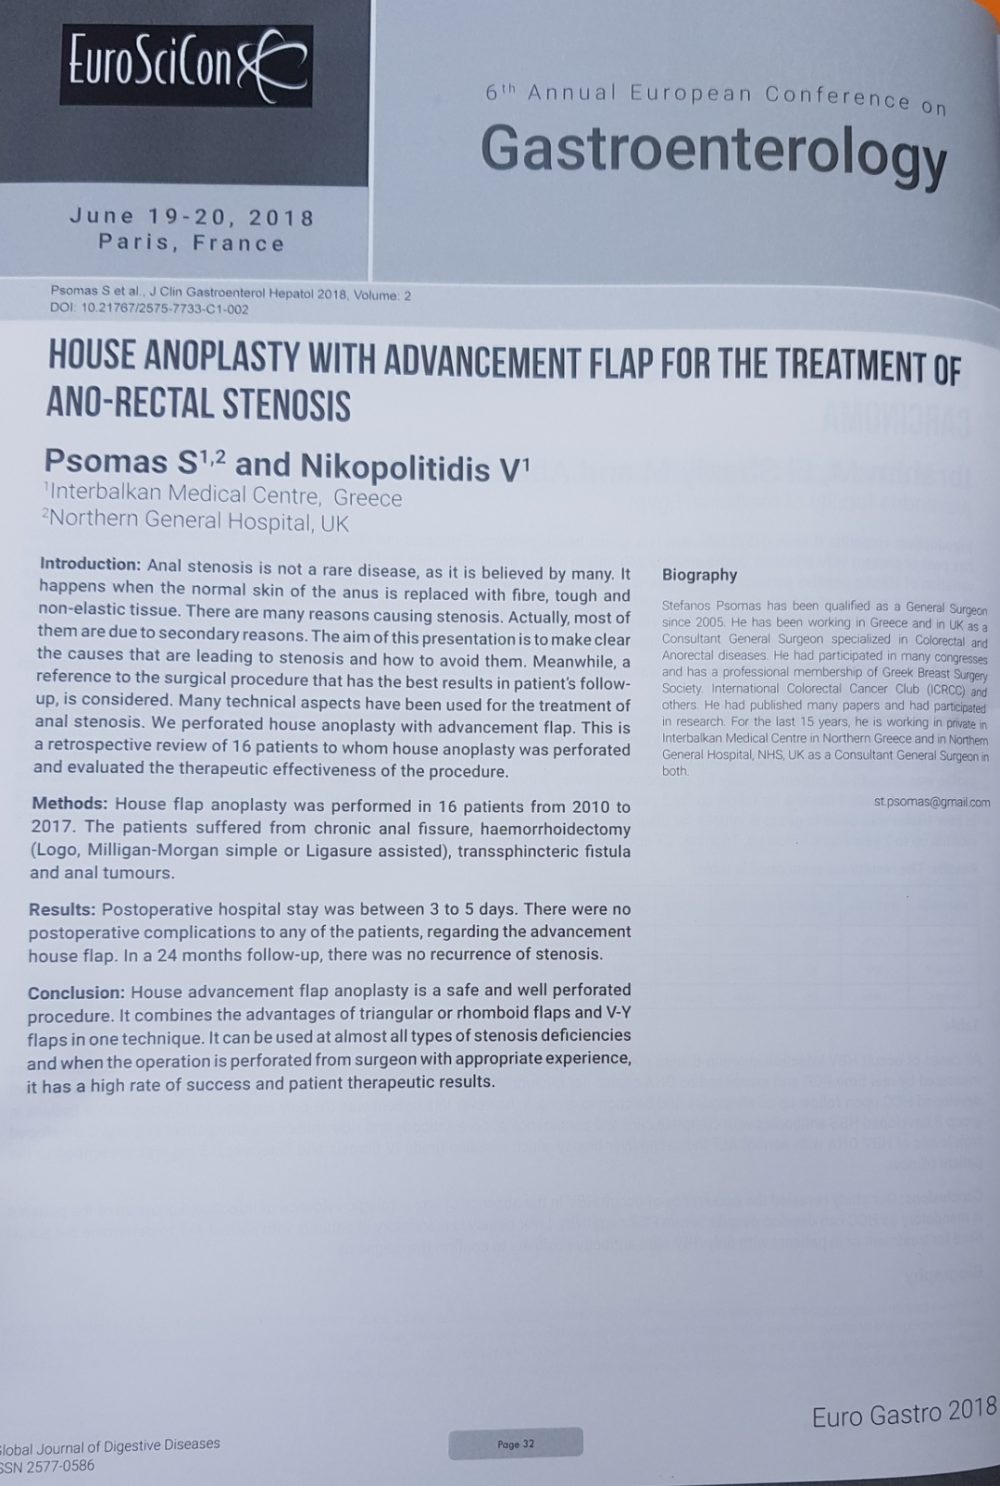 House anoplasty with advancement flap for the treatment of anorectal stenosis.